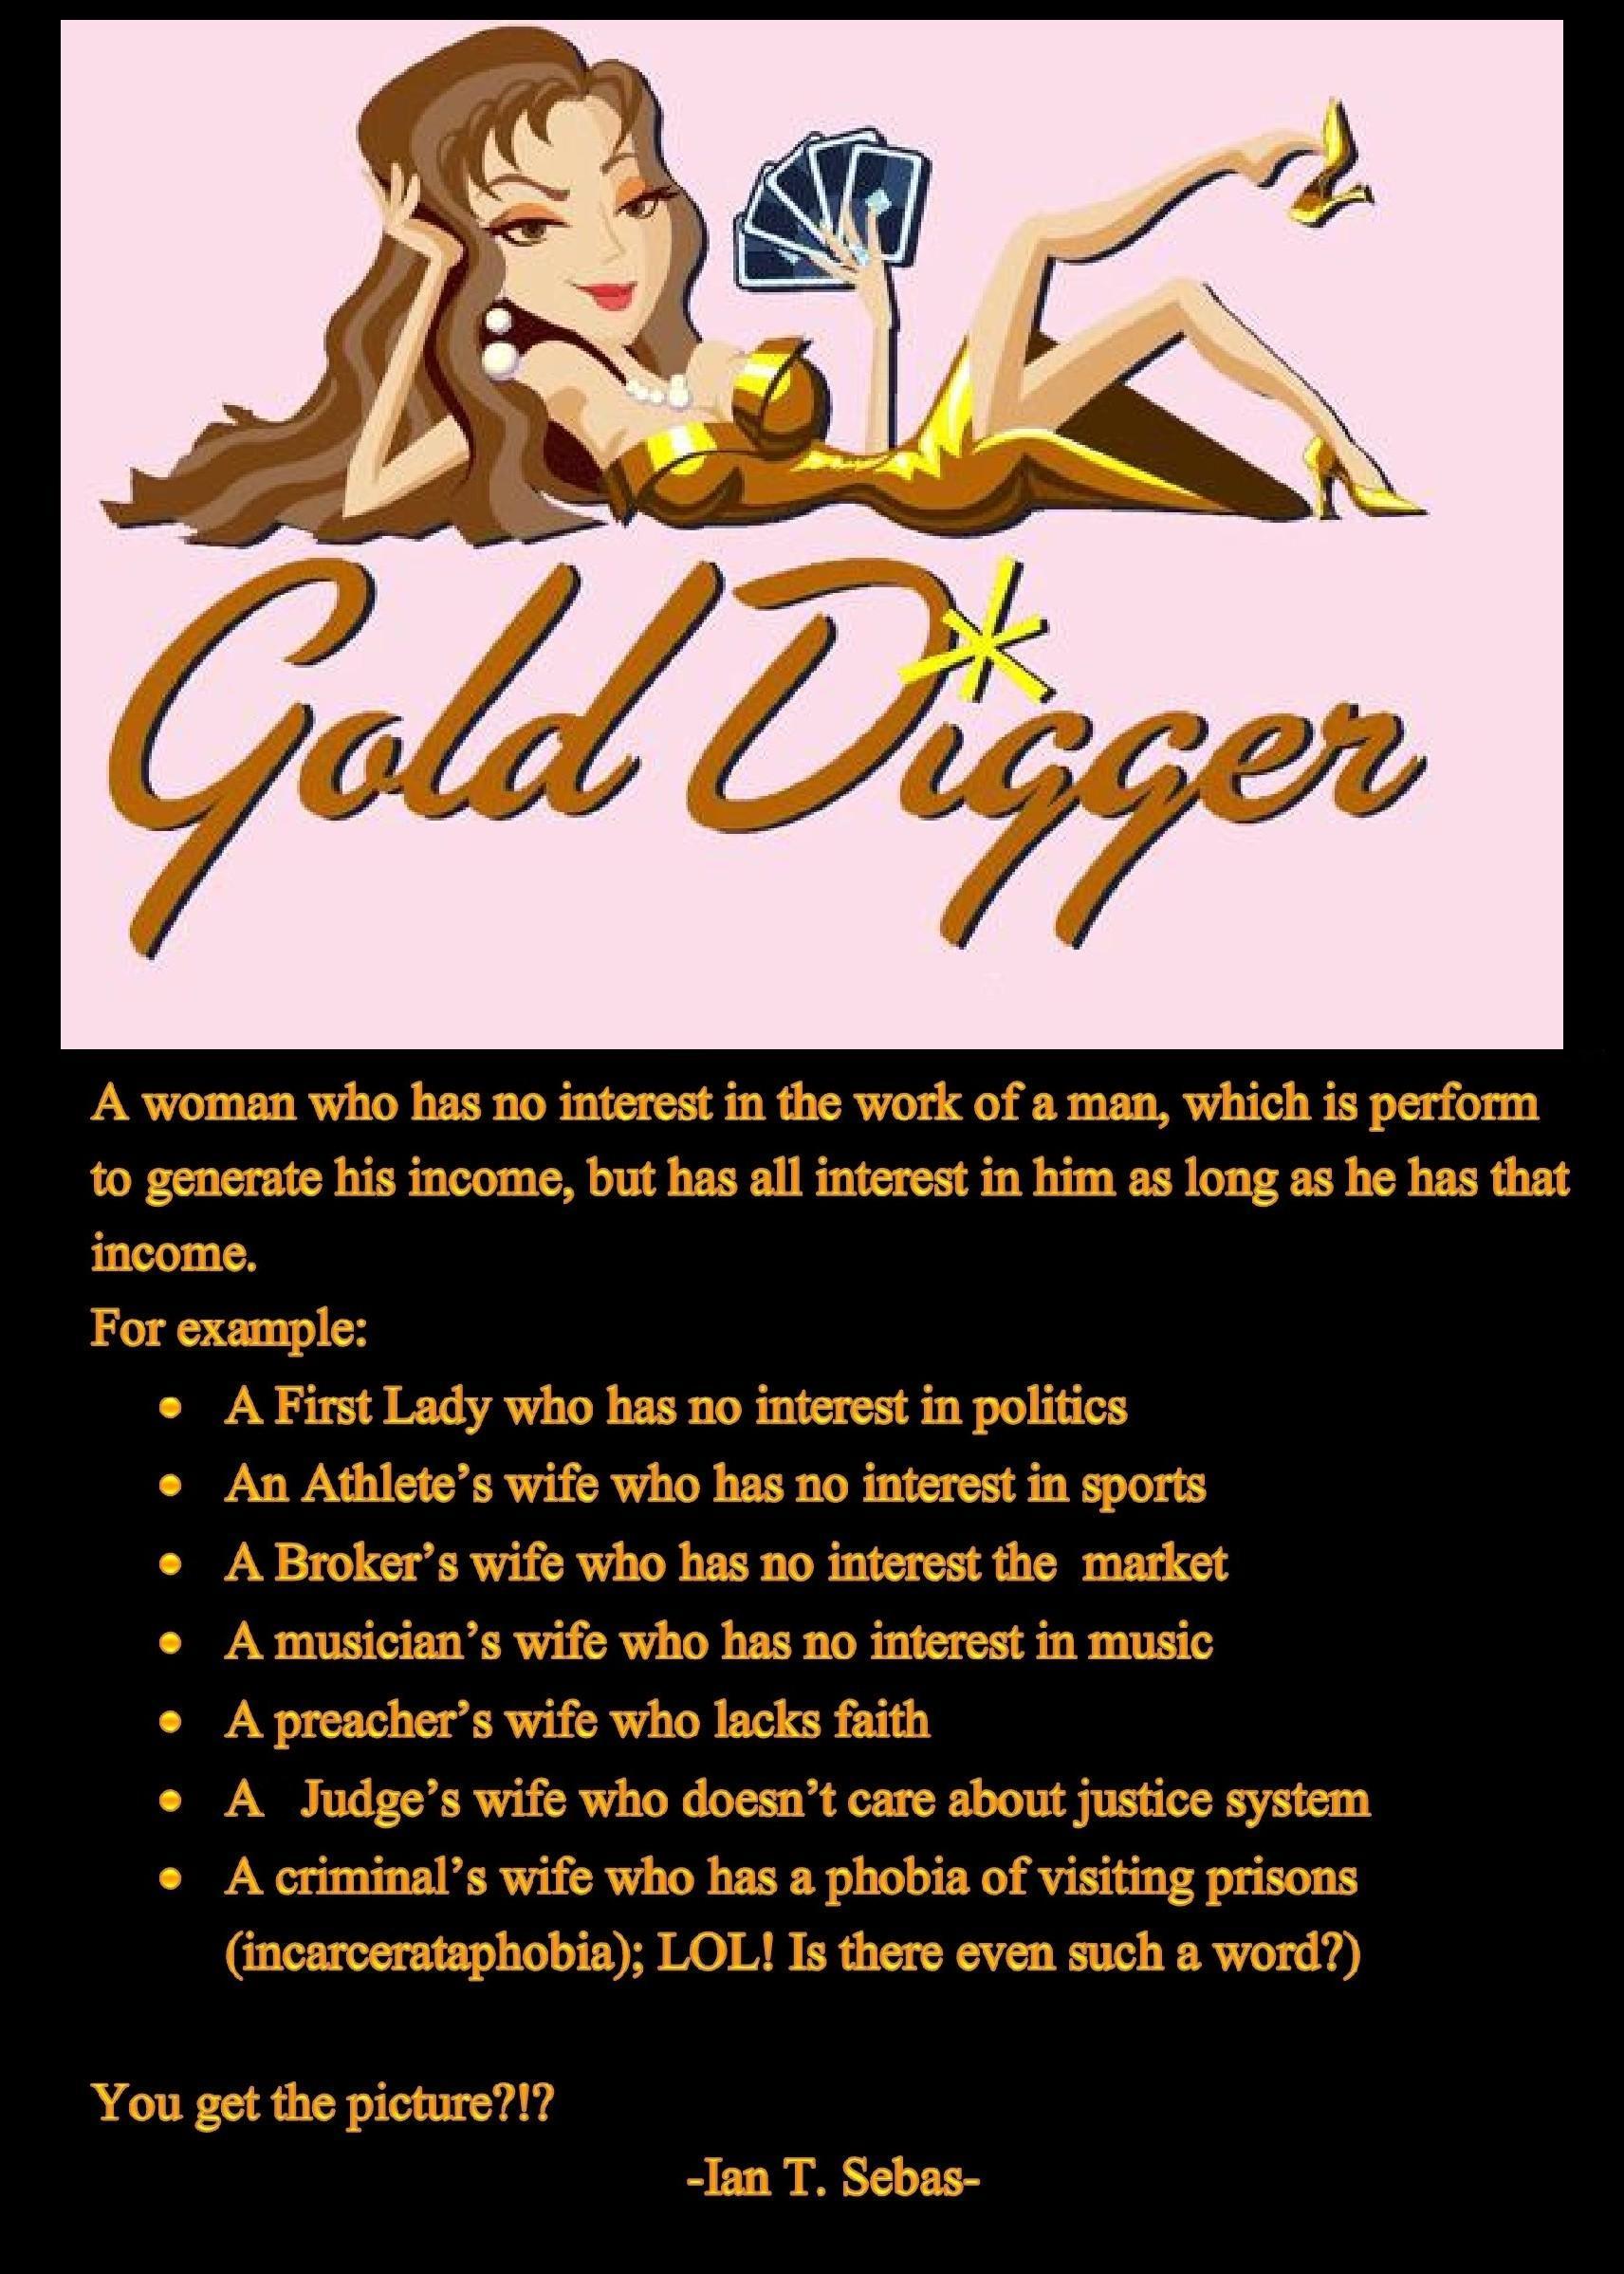 Gold Diggers Meaning